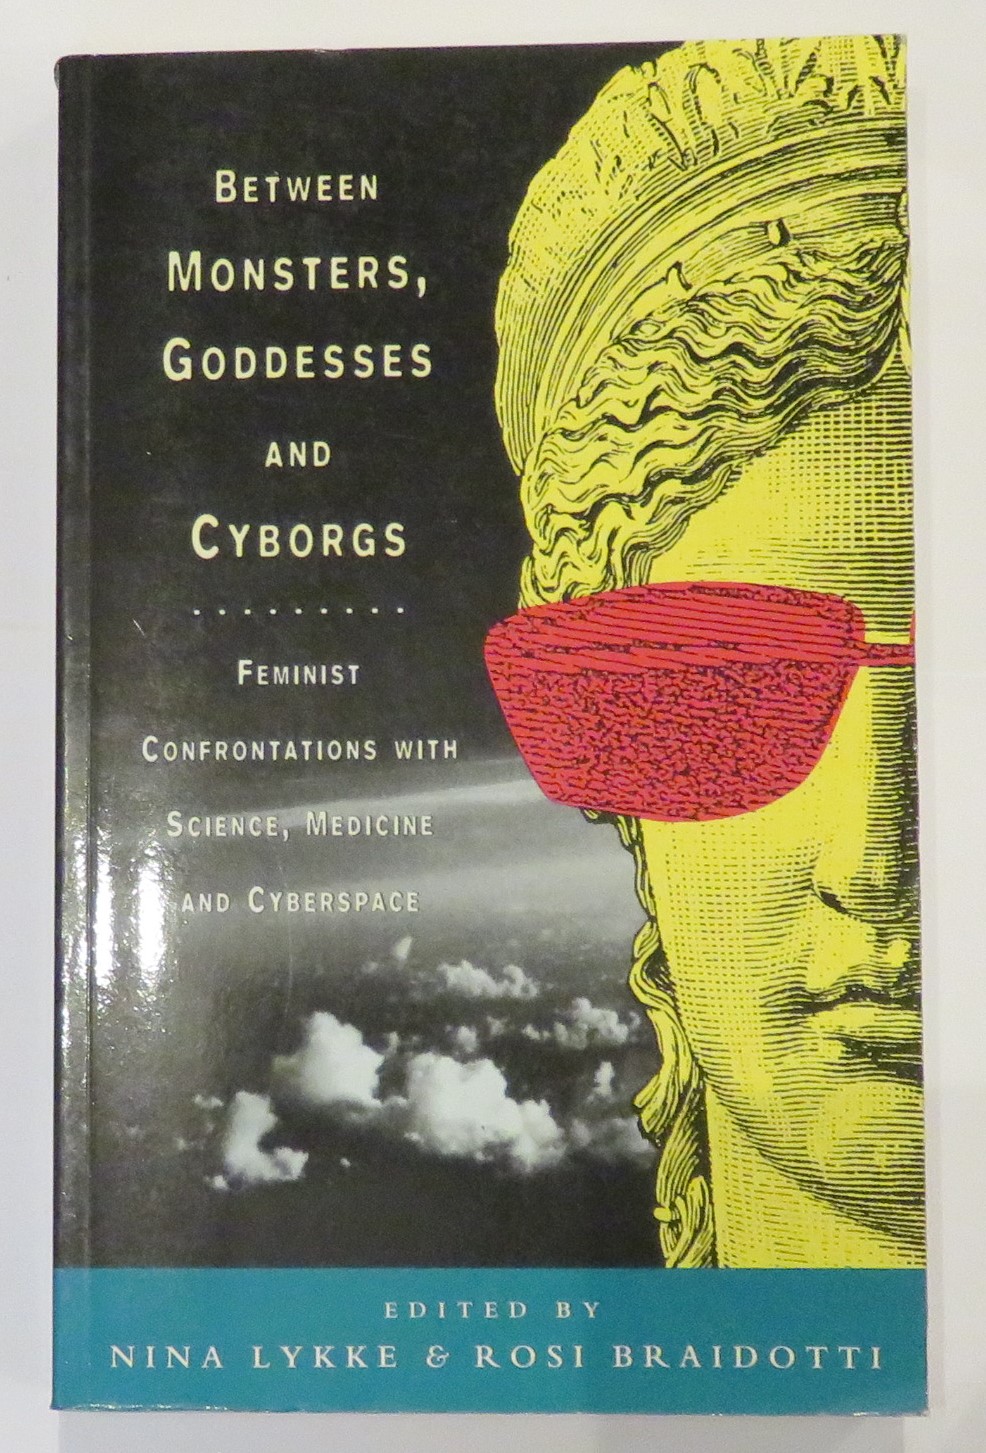 Between Monsters, Goddesses and Cyborgs